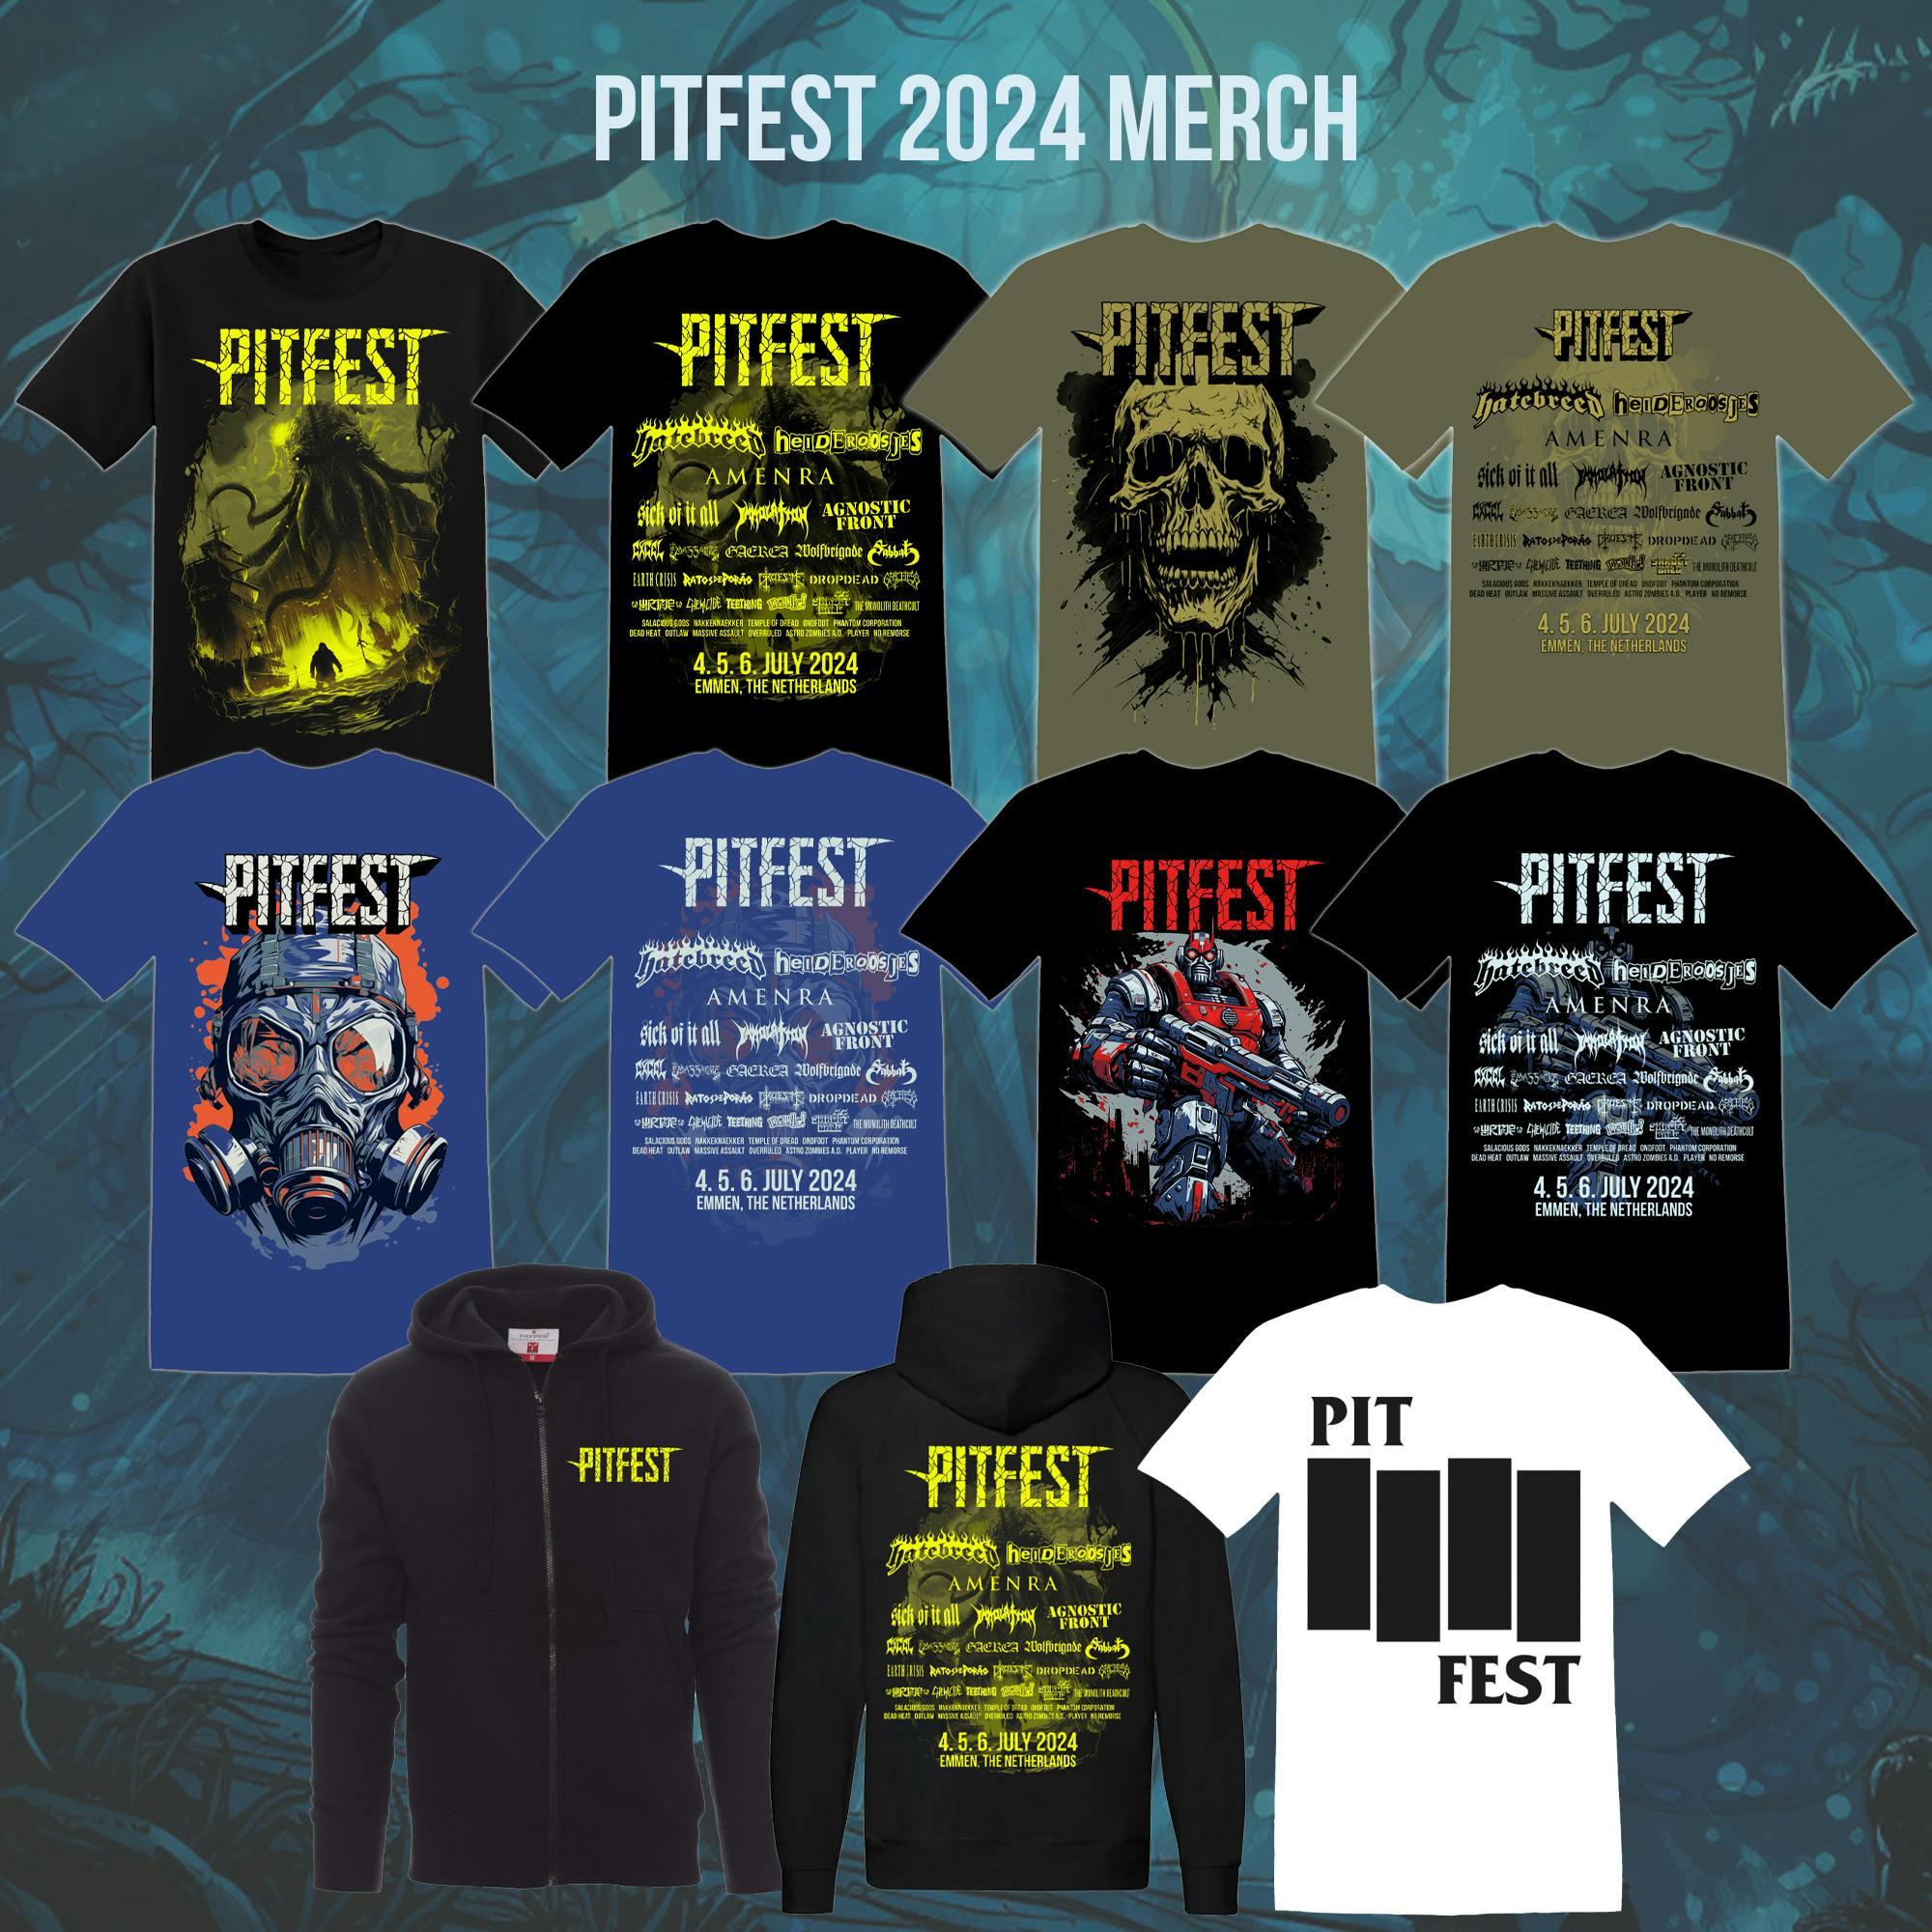 Festival merch available for pre-order